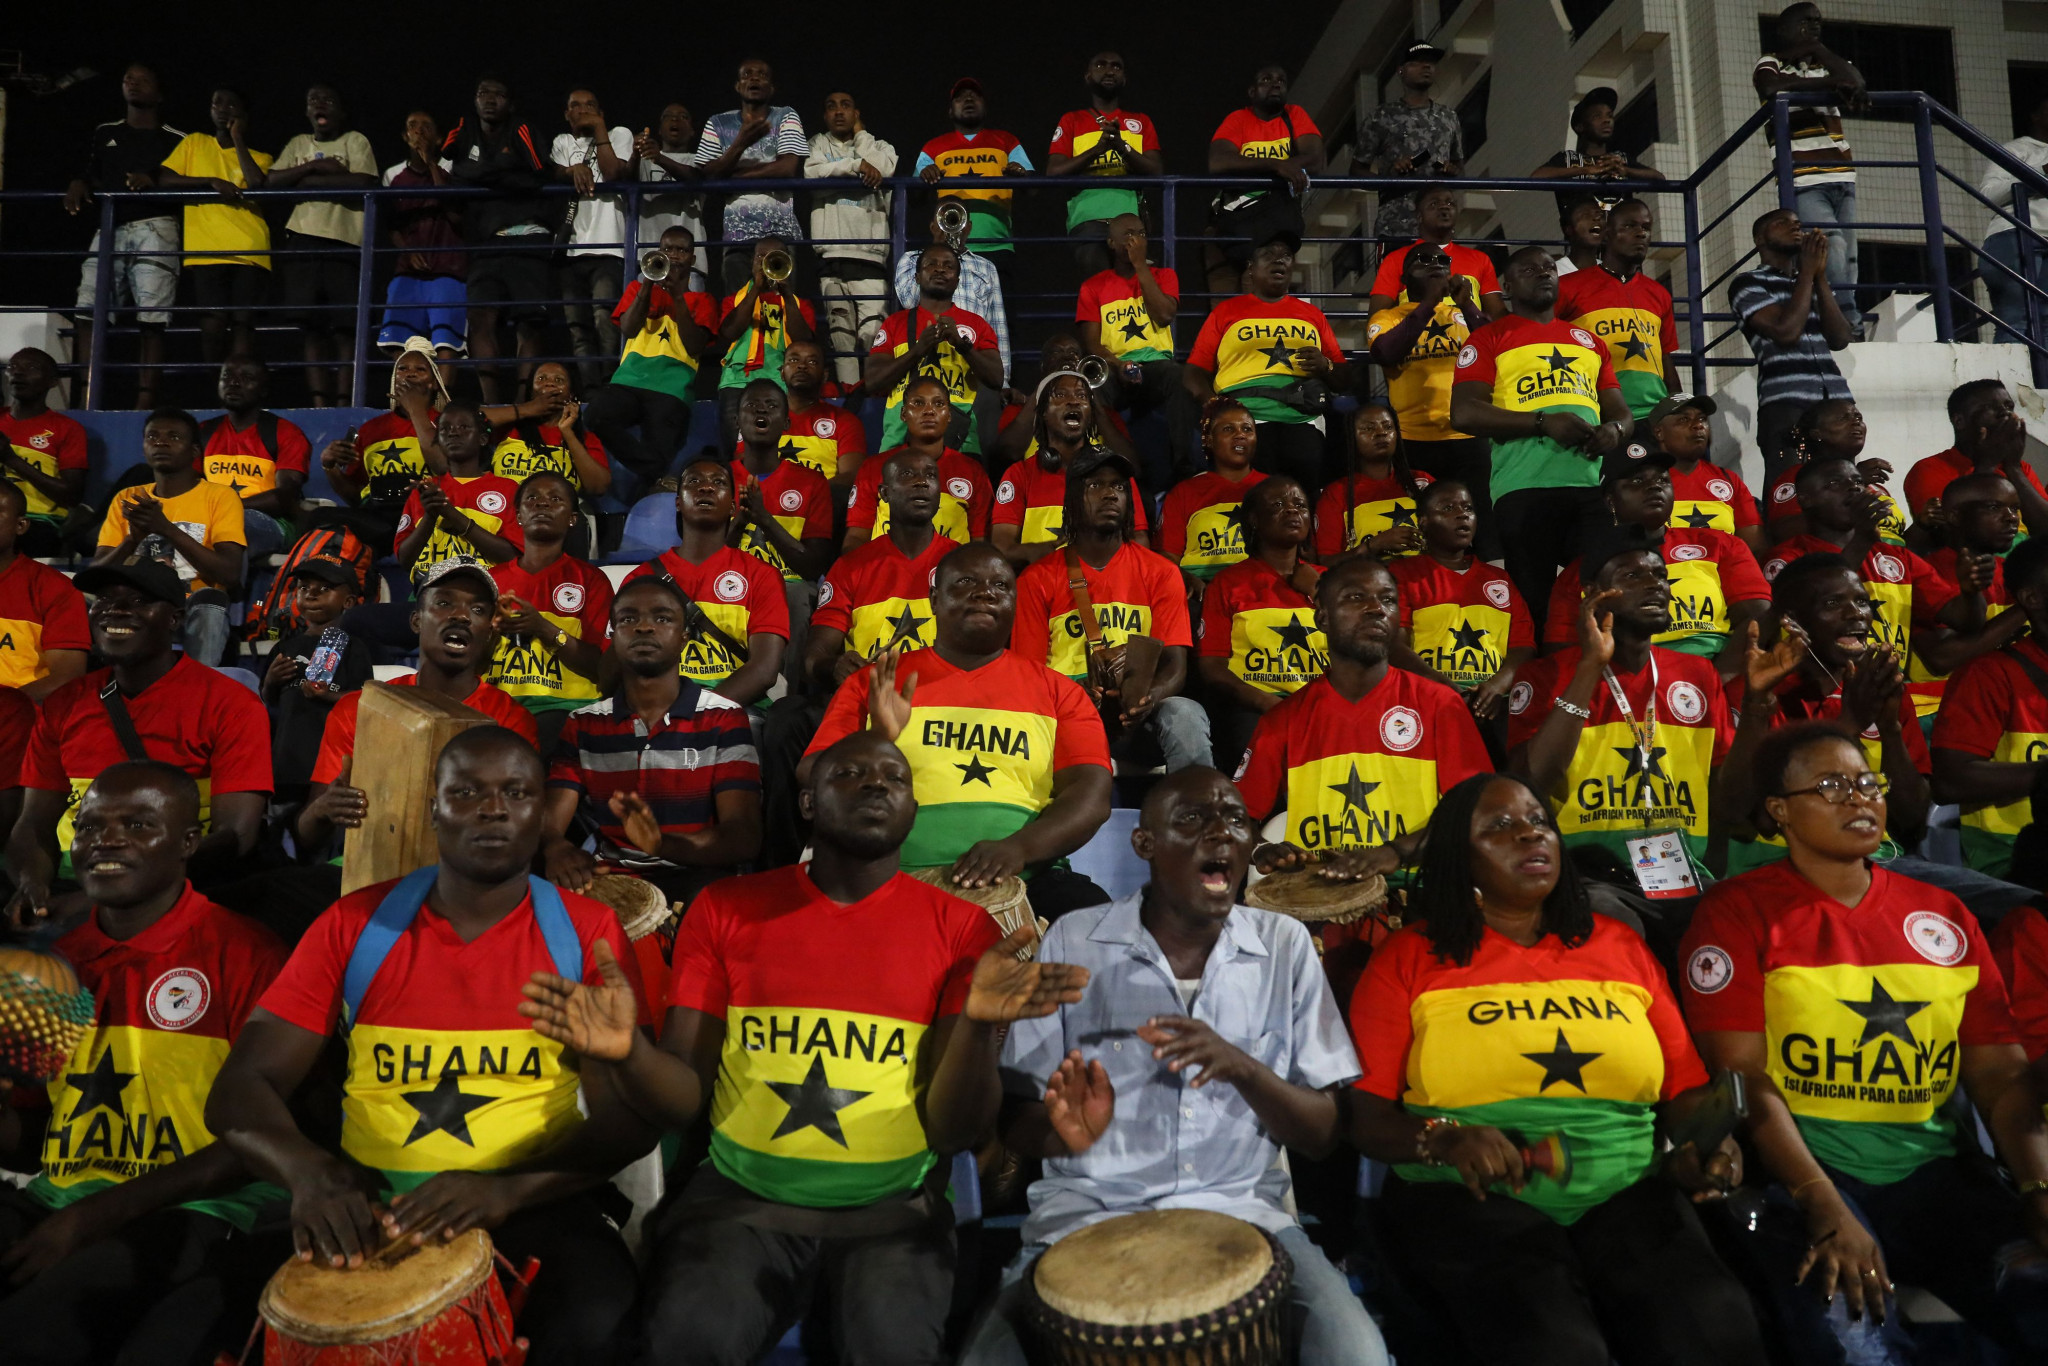 Ghana is due to host the African Games next year ©Getty Images